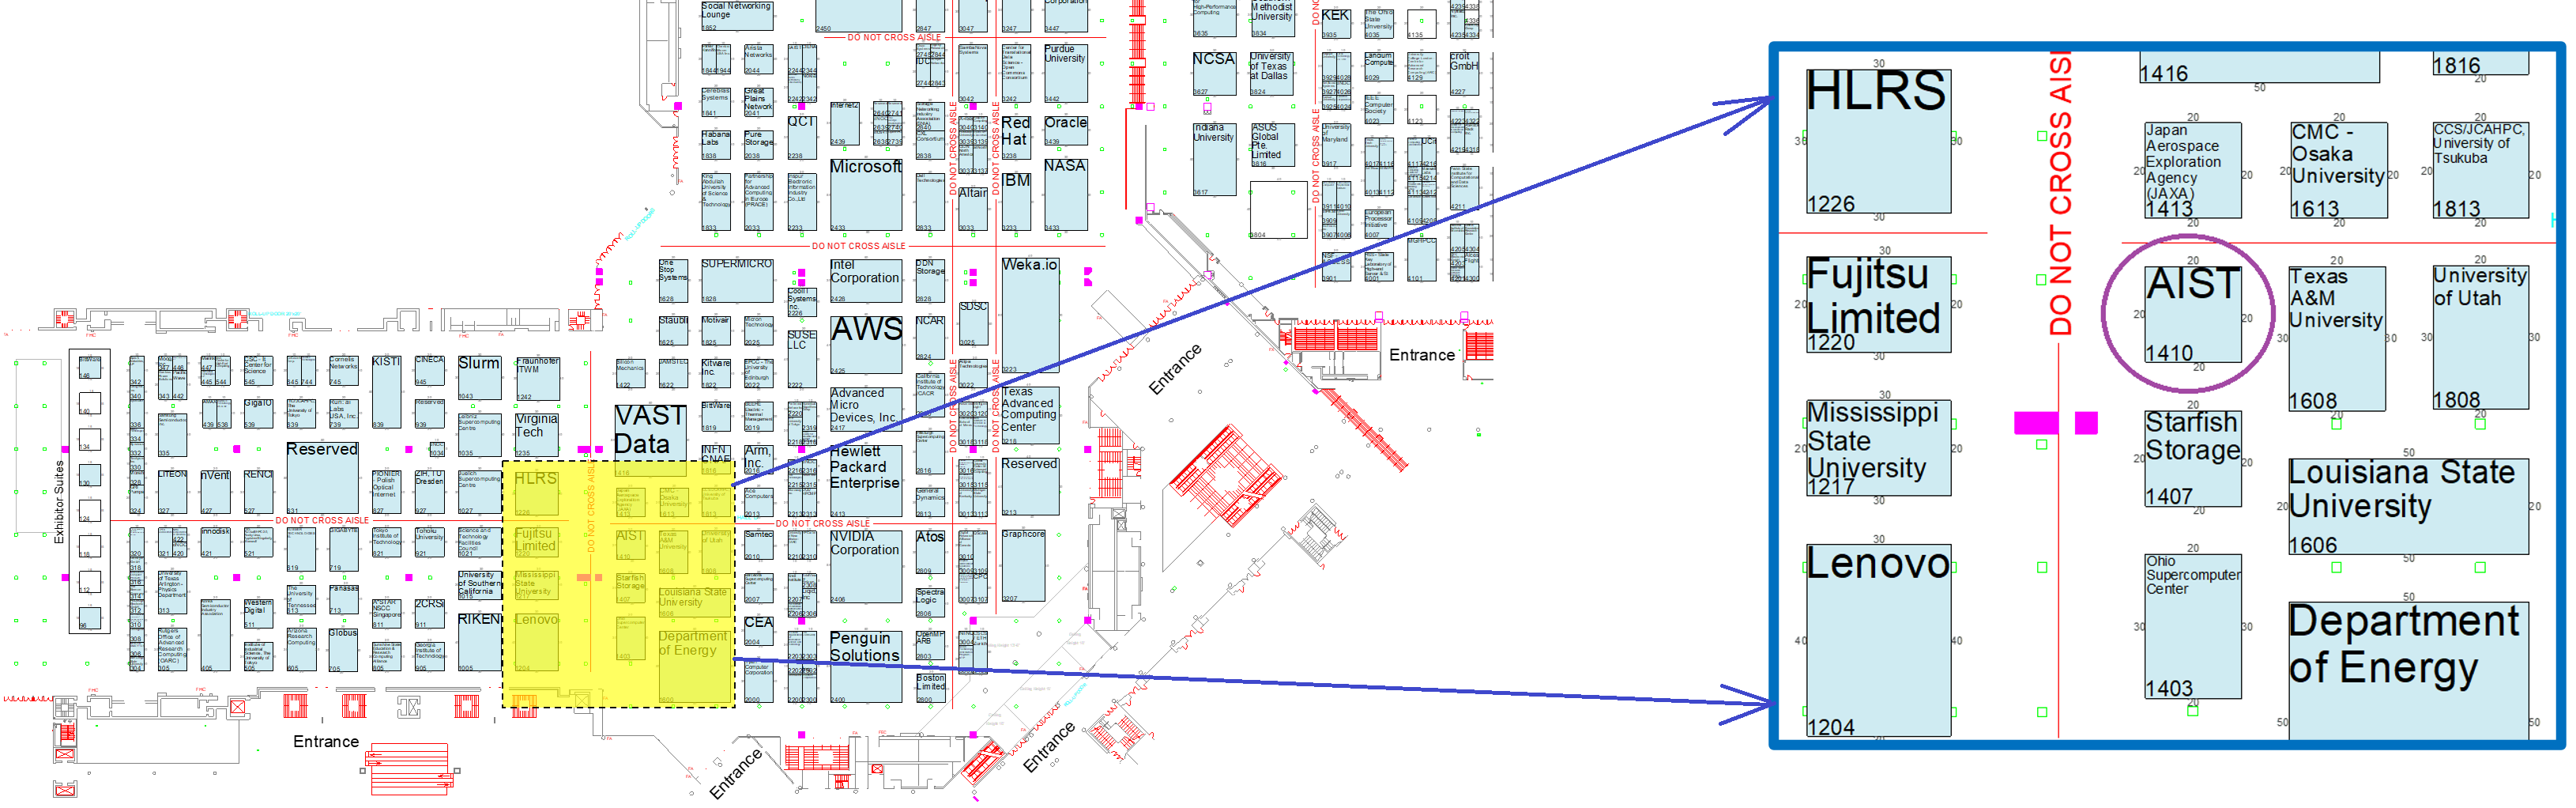 booth_map4.png